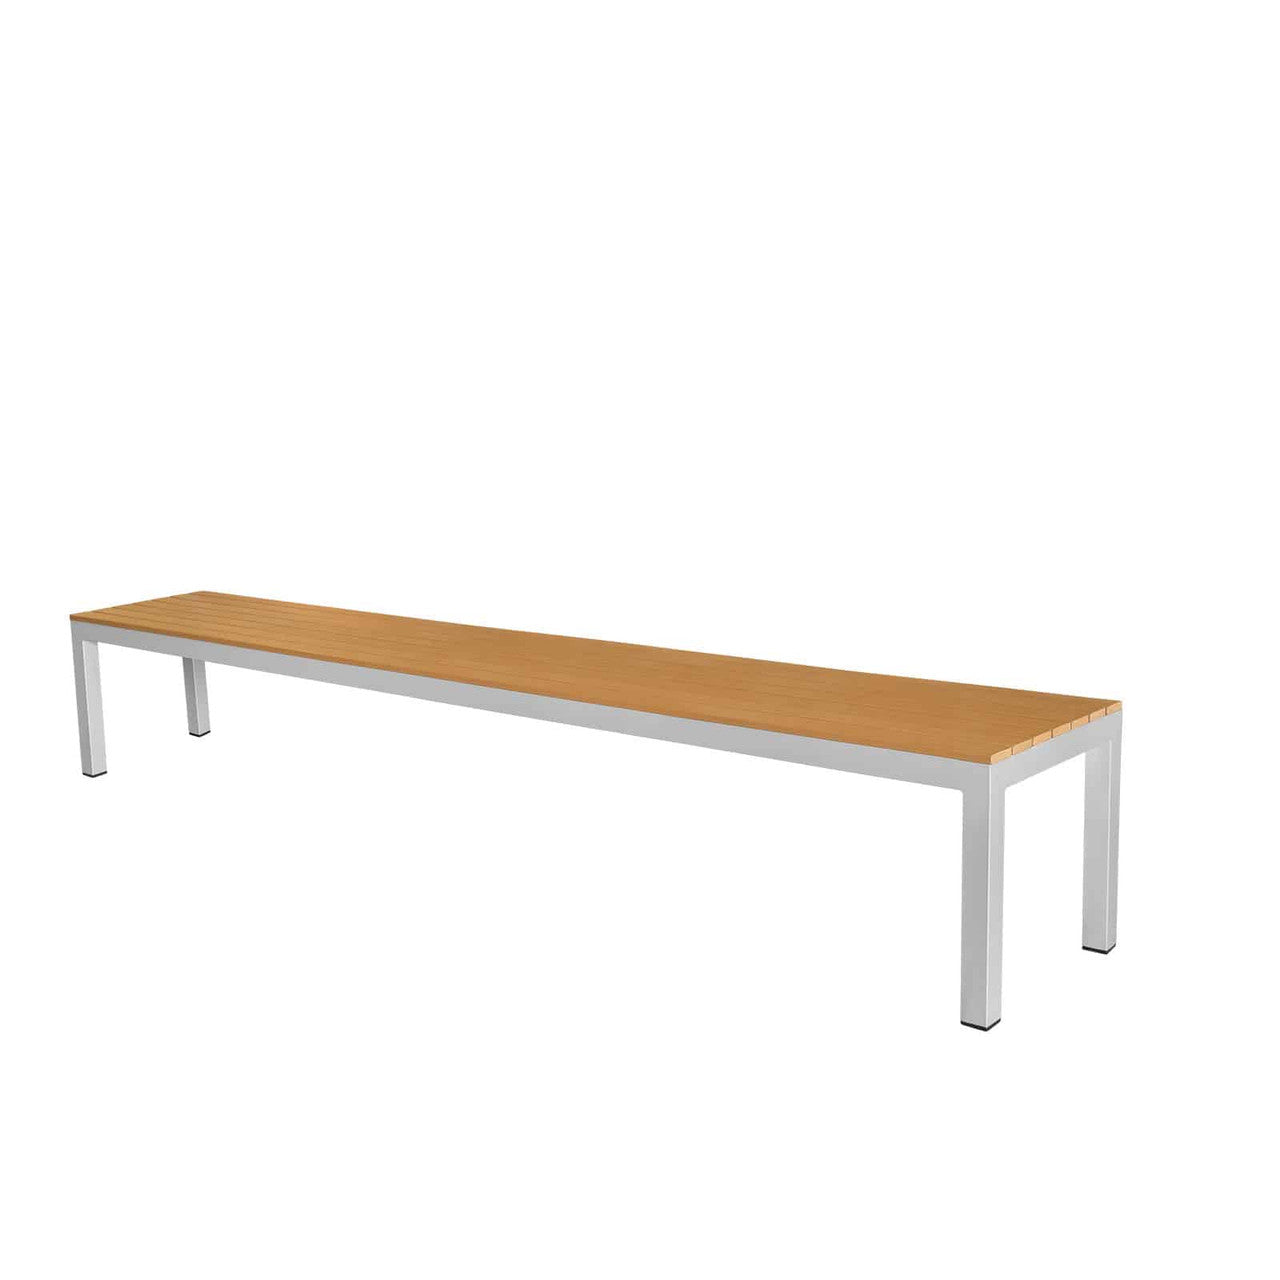 Source Furniture Vienna 10' Backless Bench